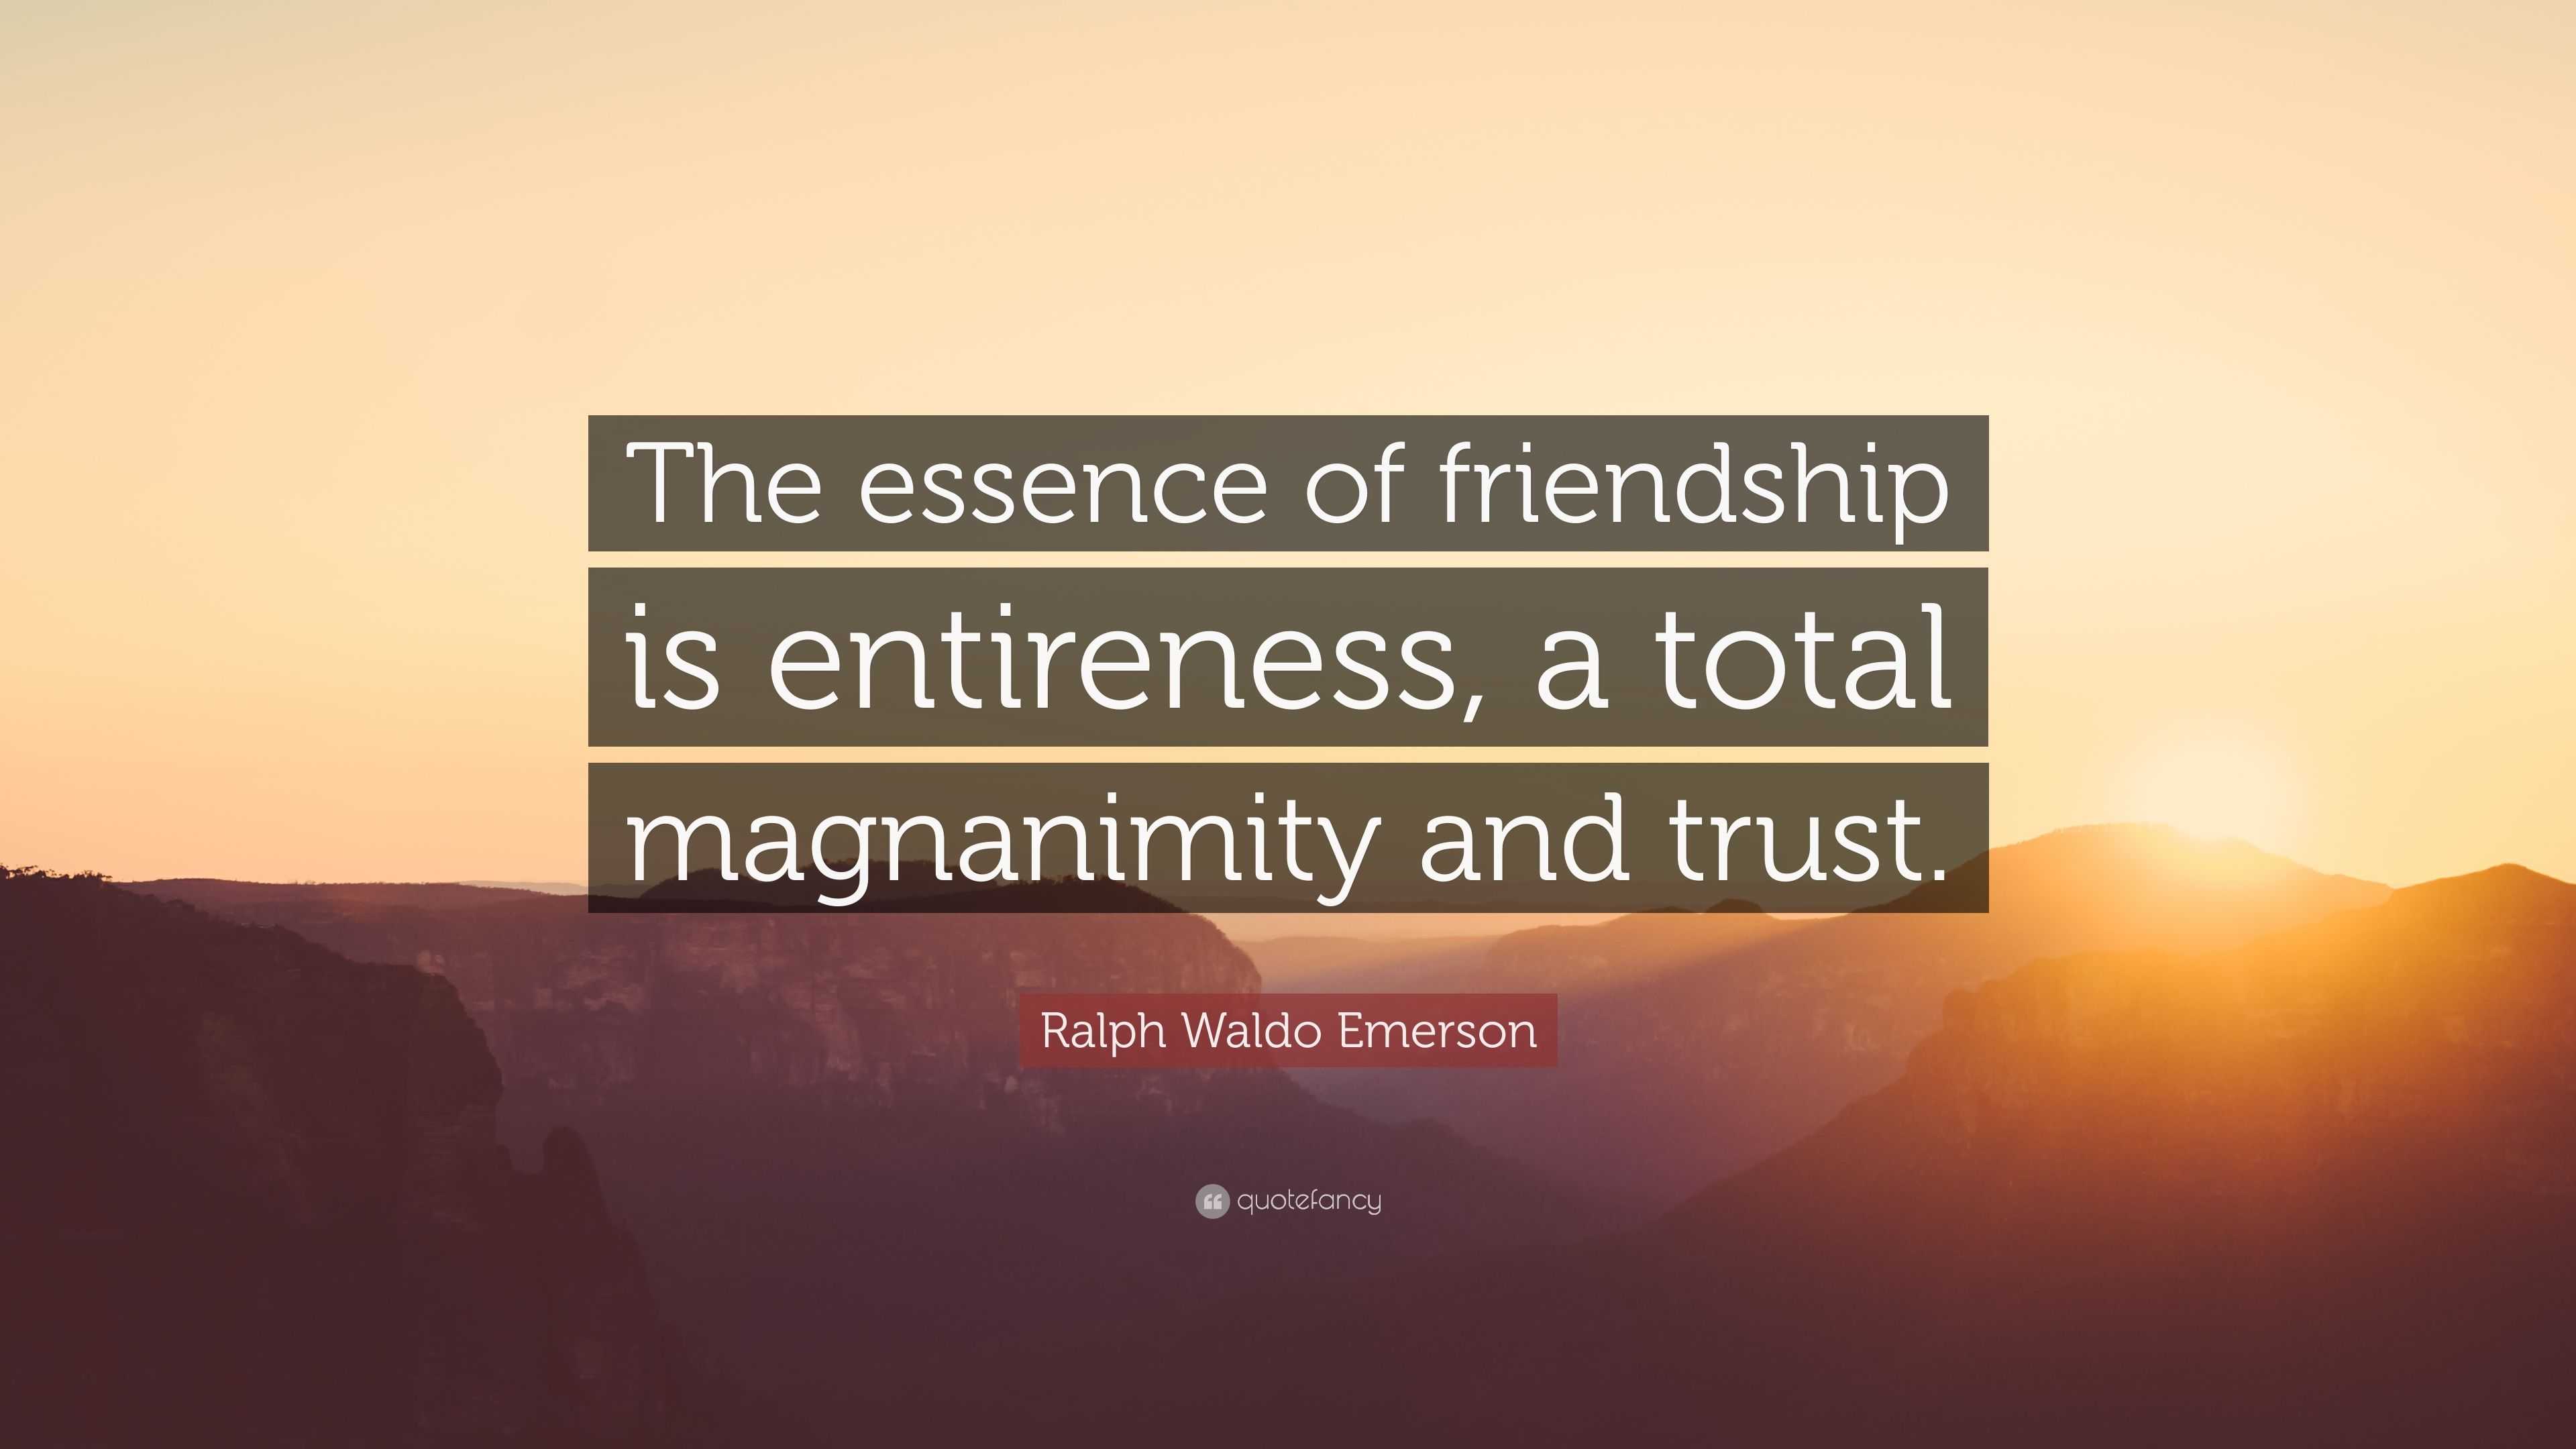 Ralph Waldo Emerson Quote: “The essence of friendship is entireness, a